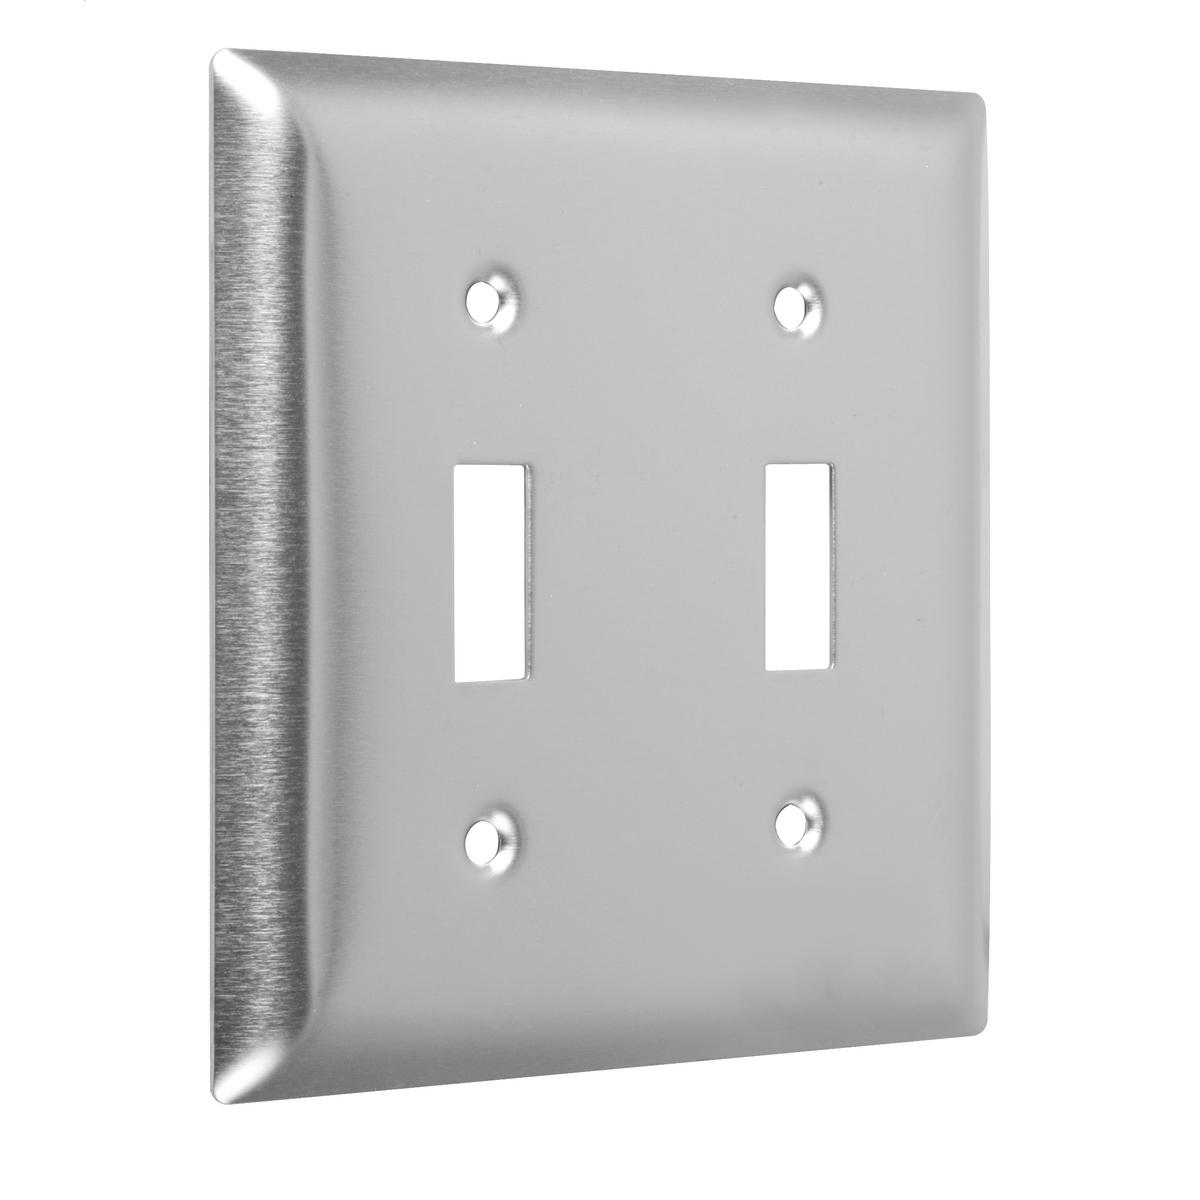 Hubbell WSS-TT 2-Gang Metal Wallplate, Standard, 2-Toggle, Stainless Steel  ; Easily primed and painted to match or complement walls. ; Won't bow, crack or distort during installation. ; Premium North American powder coat. ; Includes screw(s) in matching finish.